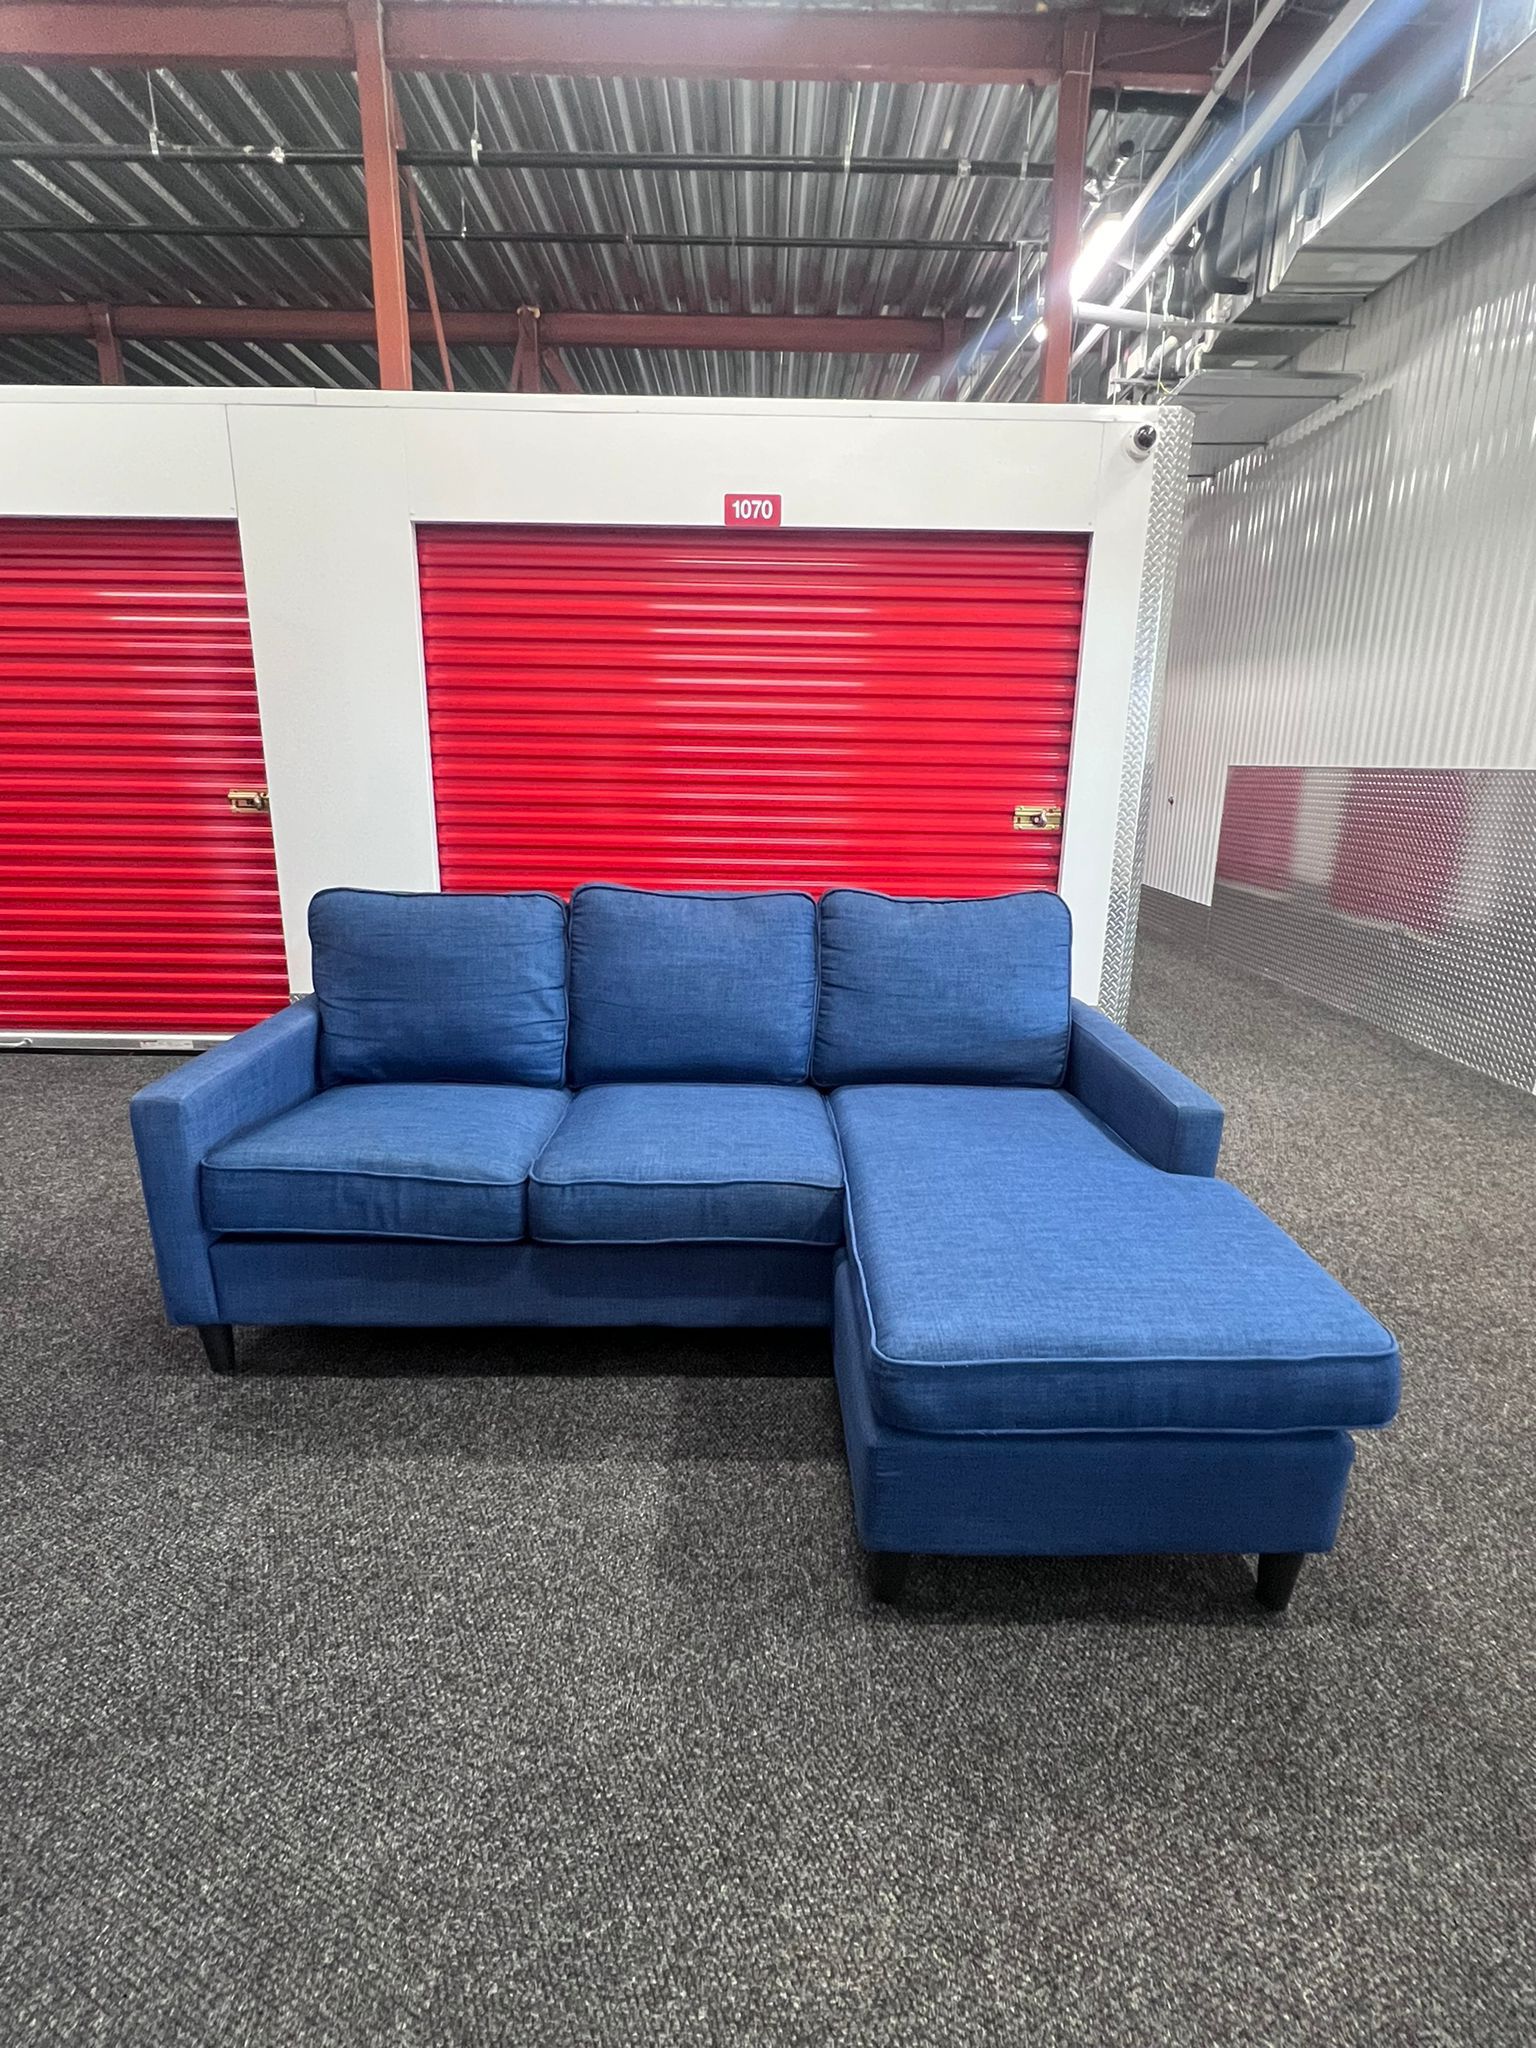 ( Free Delivery ) Bobs Sleek Blue Sectional Couch